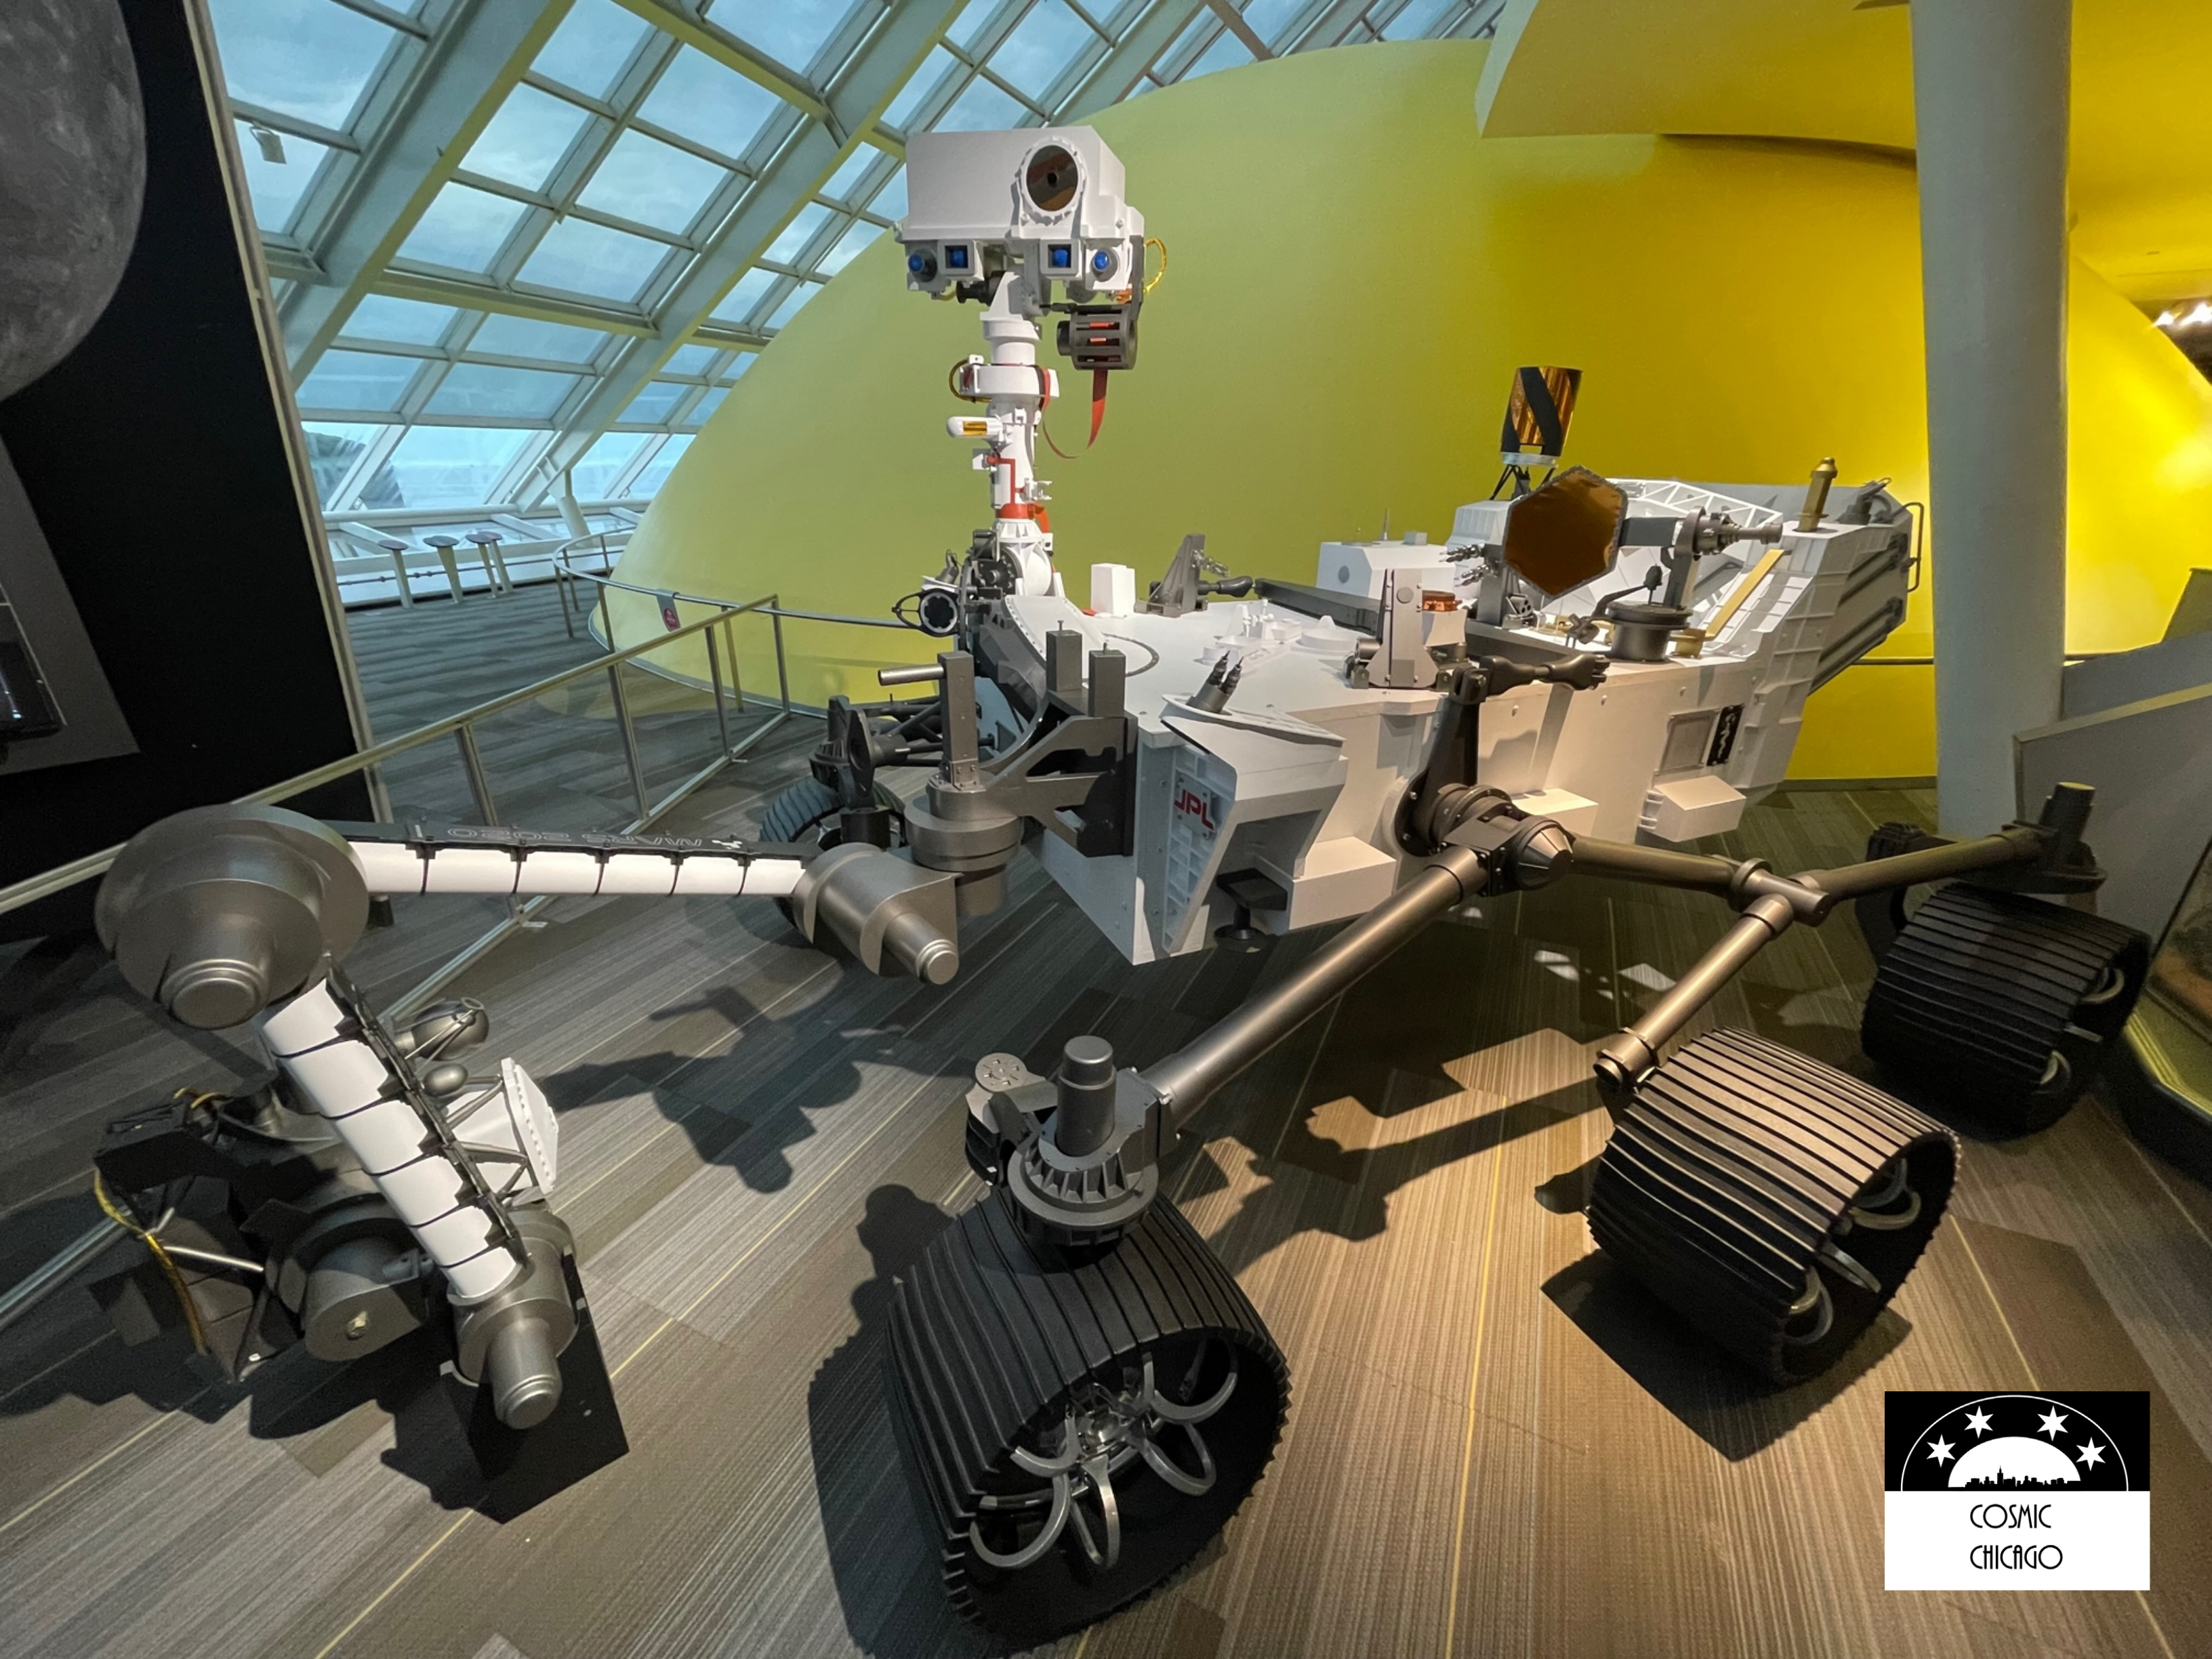 Excited by the Exploration of Mars? View Perseverance and Ingenuity at Adler Planetarium